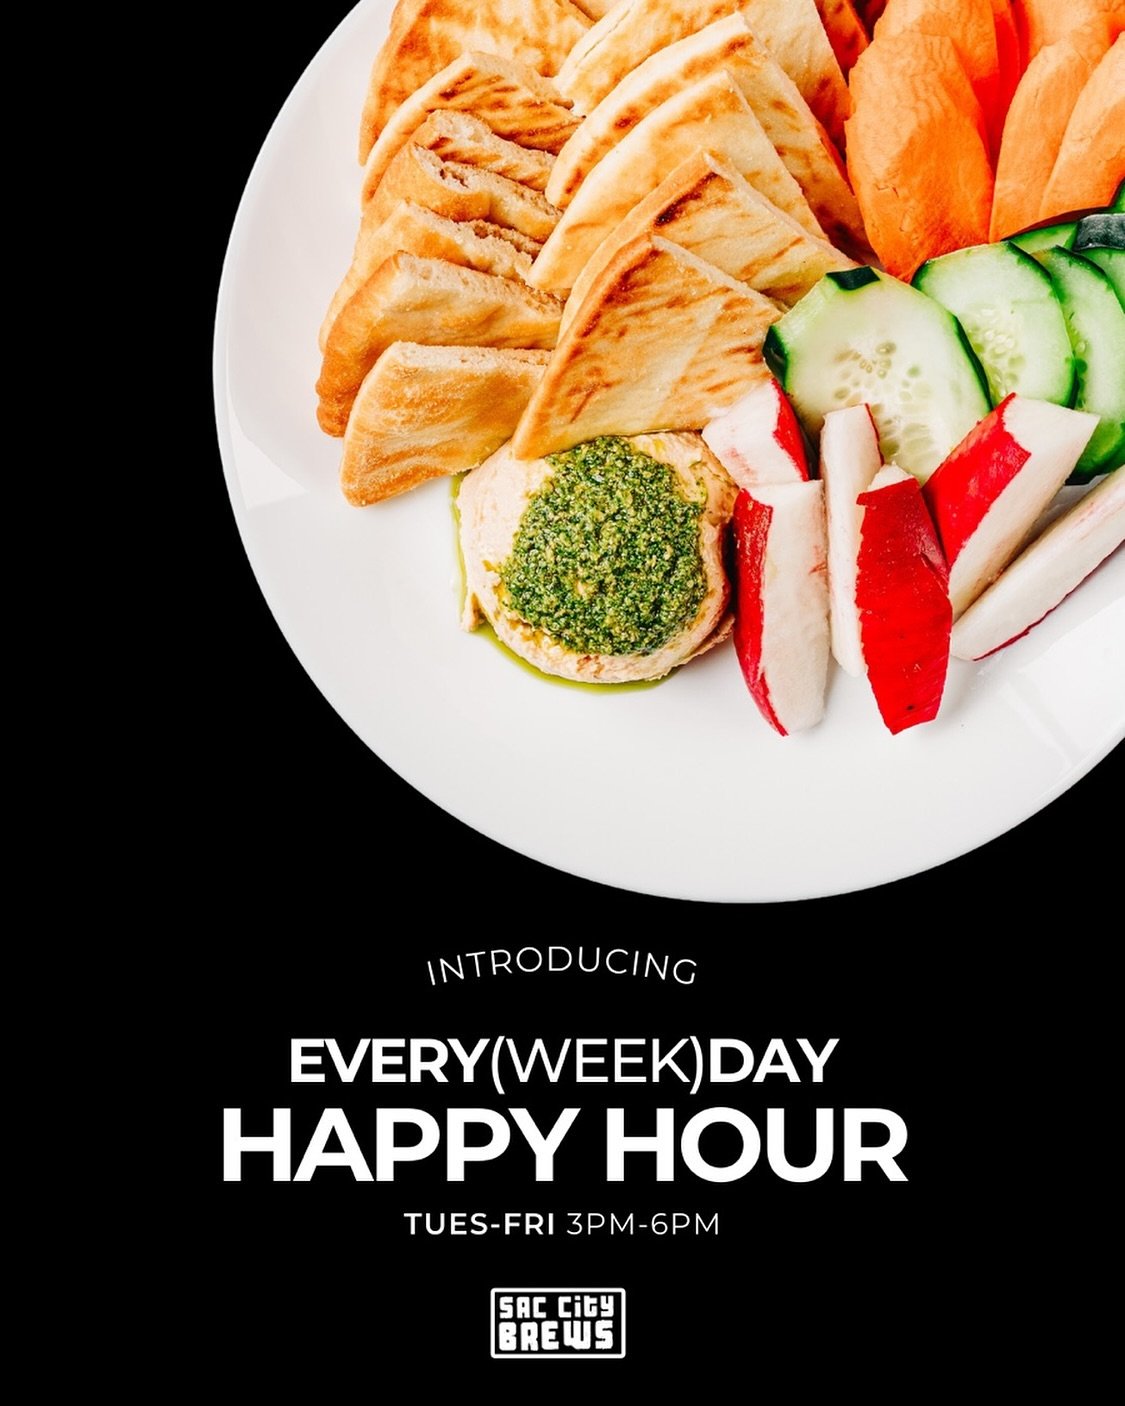 We&rsquo;re switching things up around here! Say Hello to EVERY(week)DAY HAPPY HOUR!

Tues-Fri 3-6pm
$2 Off Pints
$1 Off Half Pints
$7 Snacks

Snack specials will adjust every month due to seasonal specials and local produce.

Come share a pint!

&md